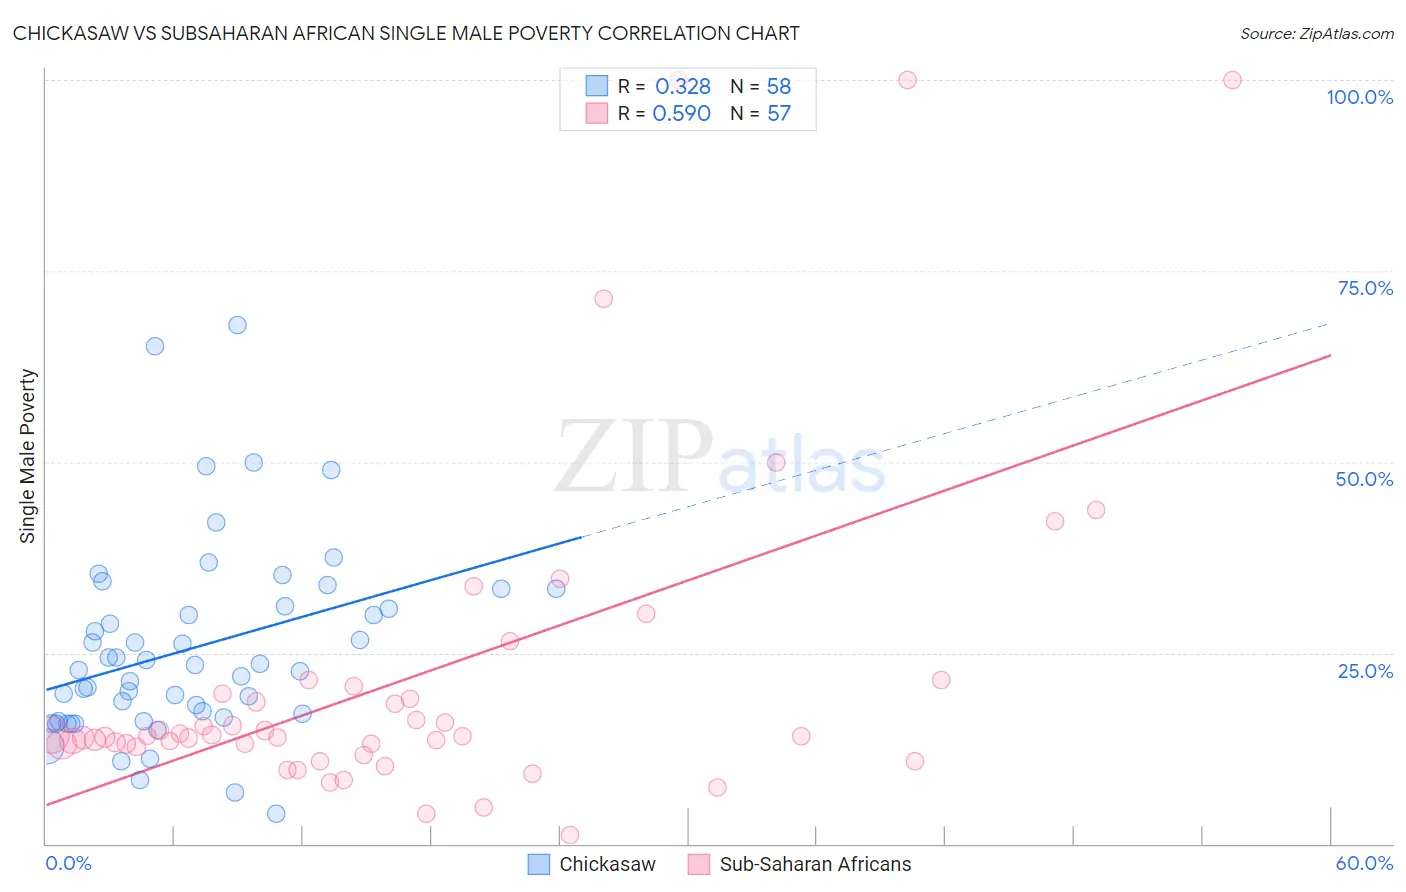 Chickasaw vs Subsaharan African Single Male Poverty